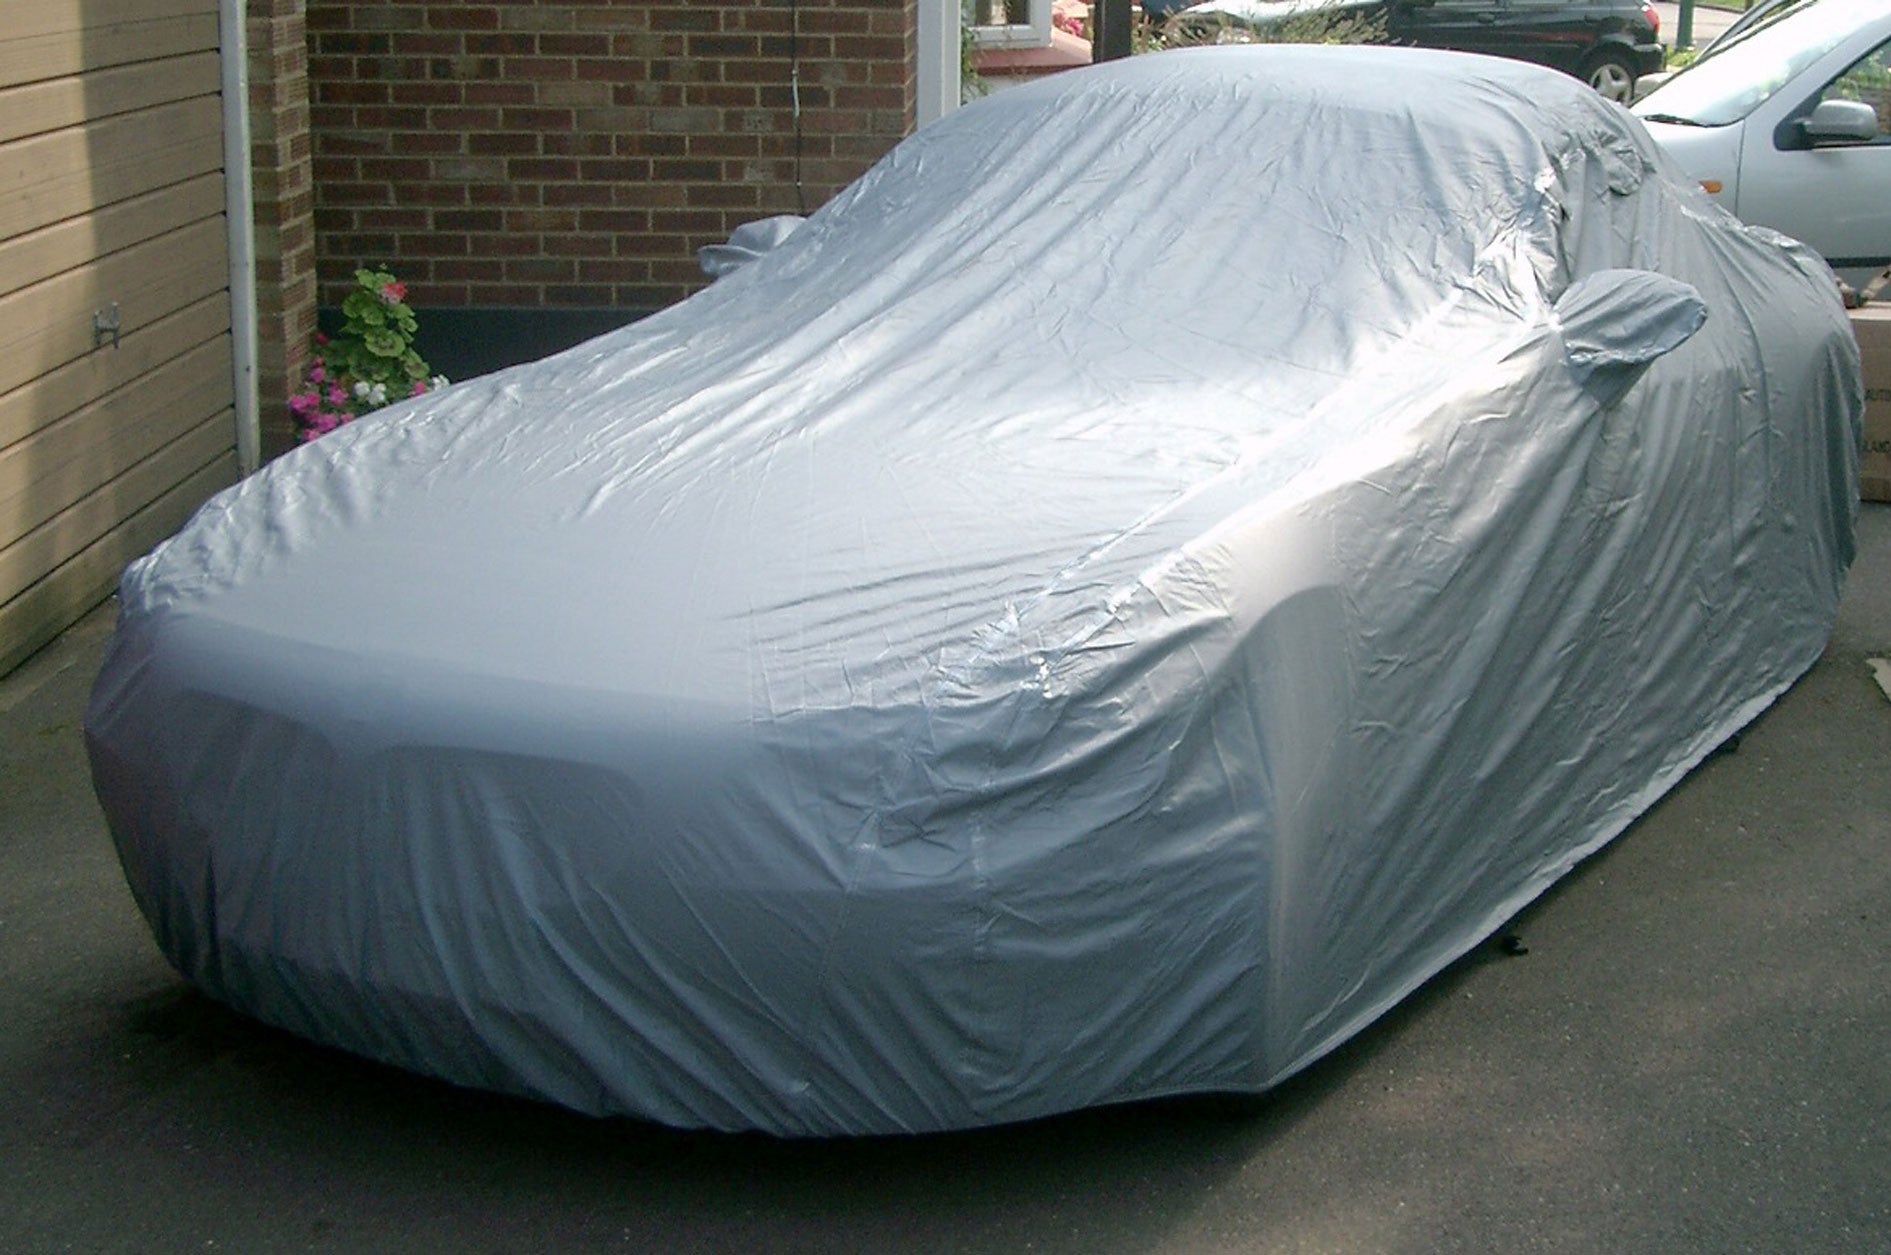 Monsoon outdoor waterproof winter car covers for VAUXHALL - Storm